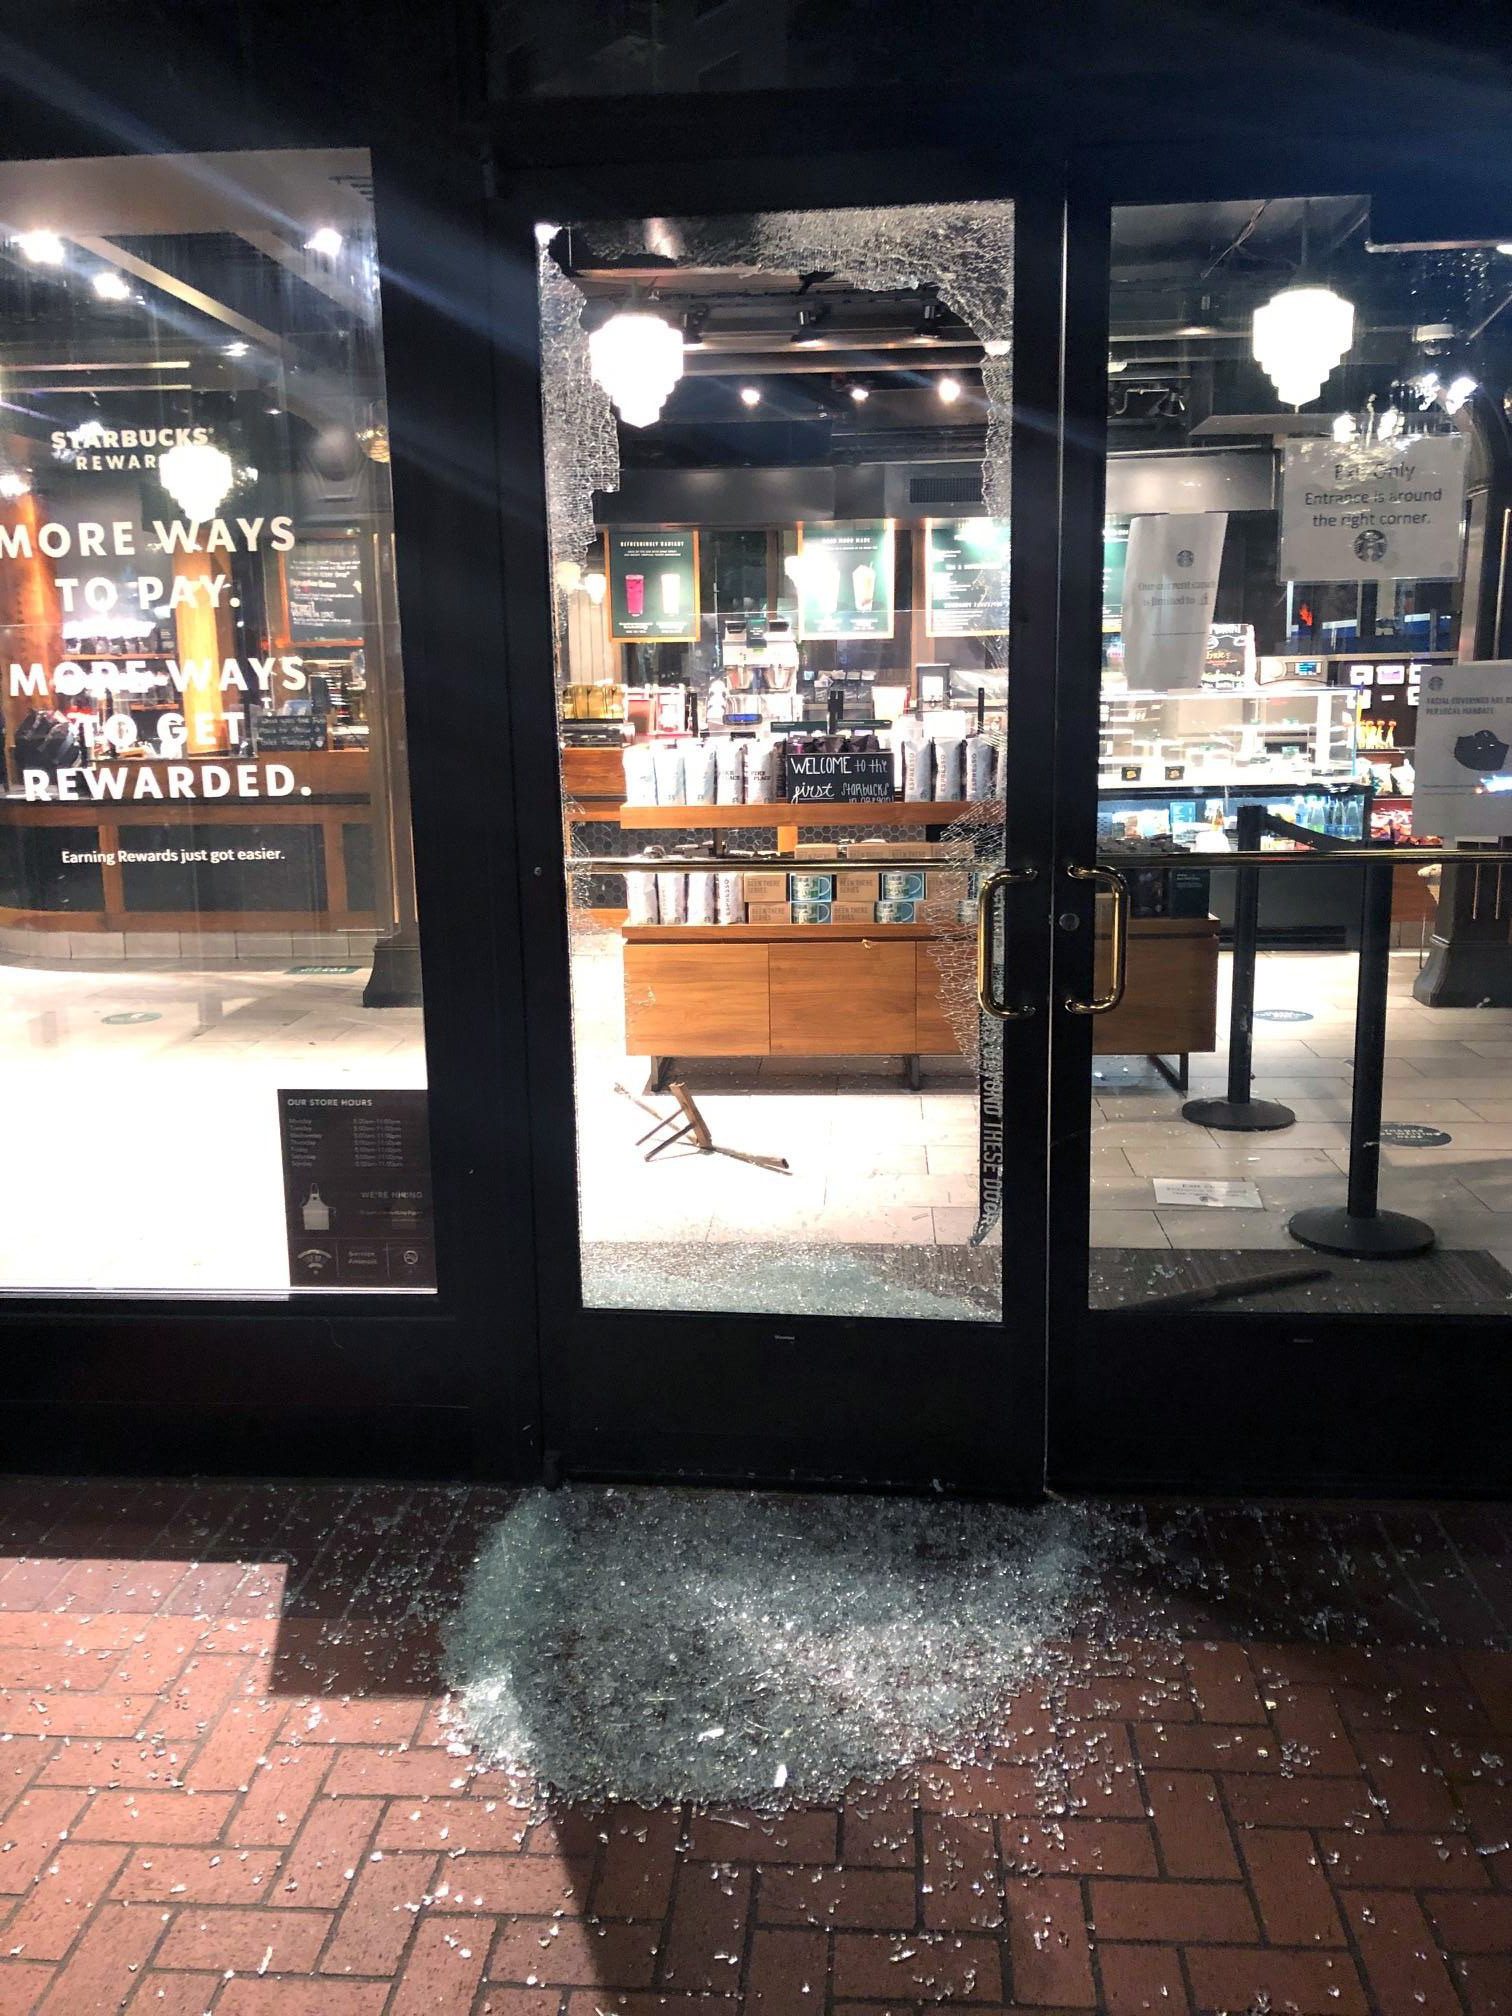 PHOTO: Protesters smashed windows at a Starbucks and other businesses in downtown Portland, on May 25, 2021.